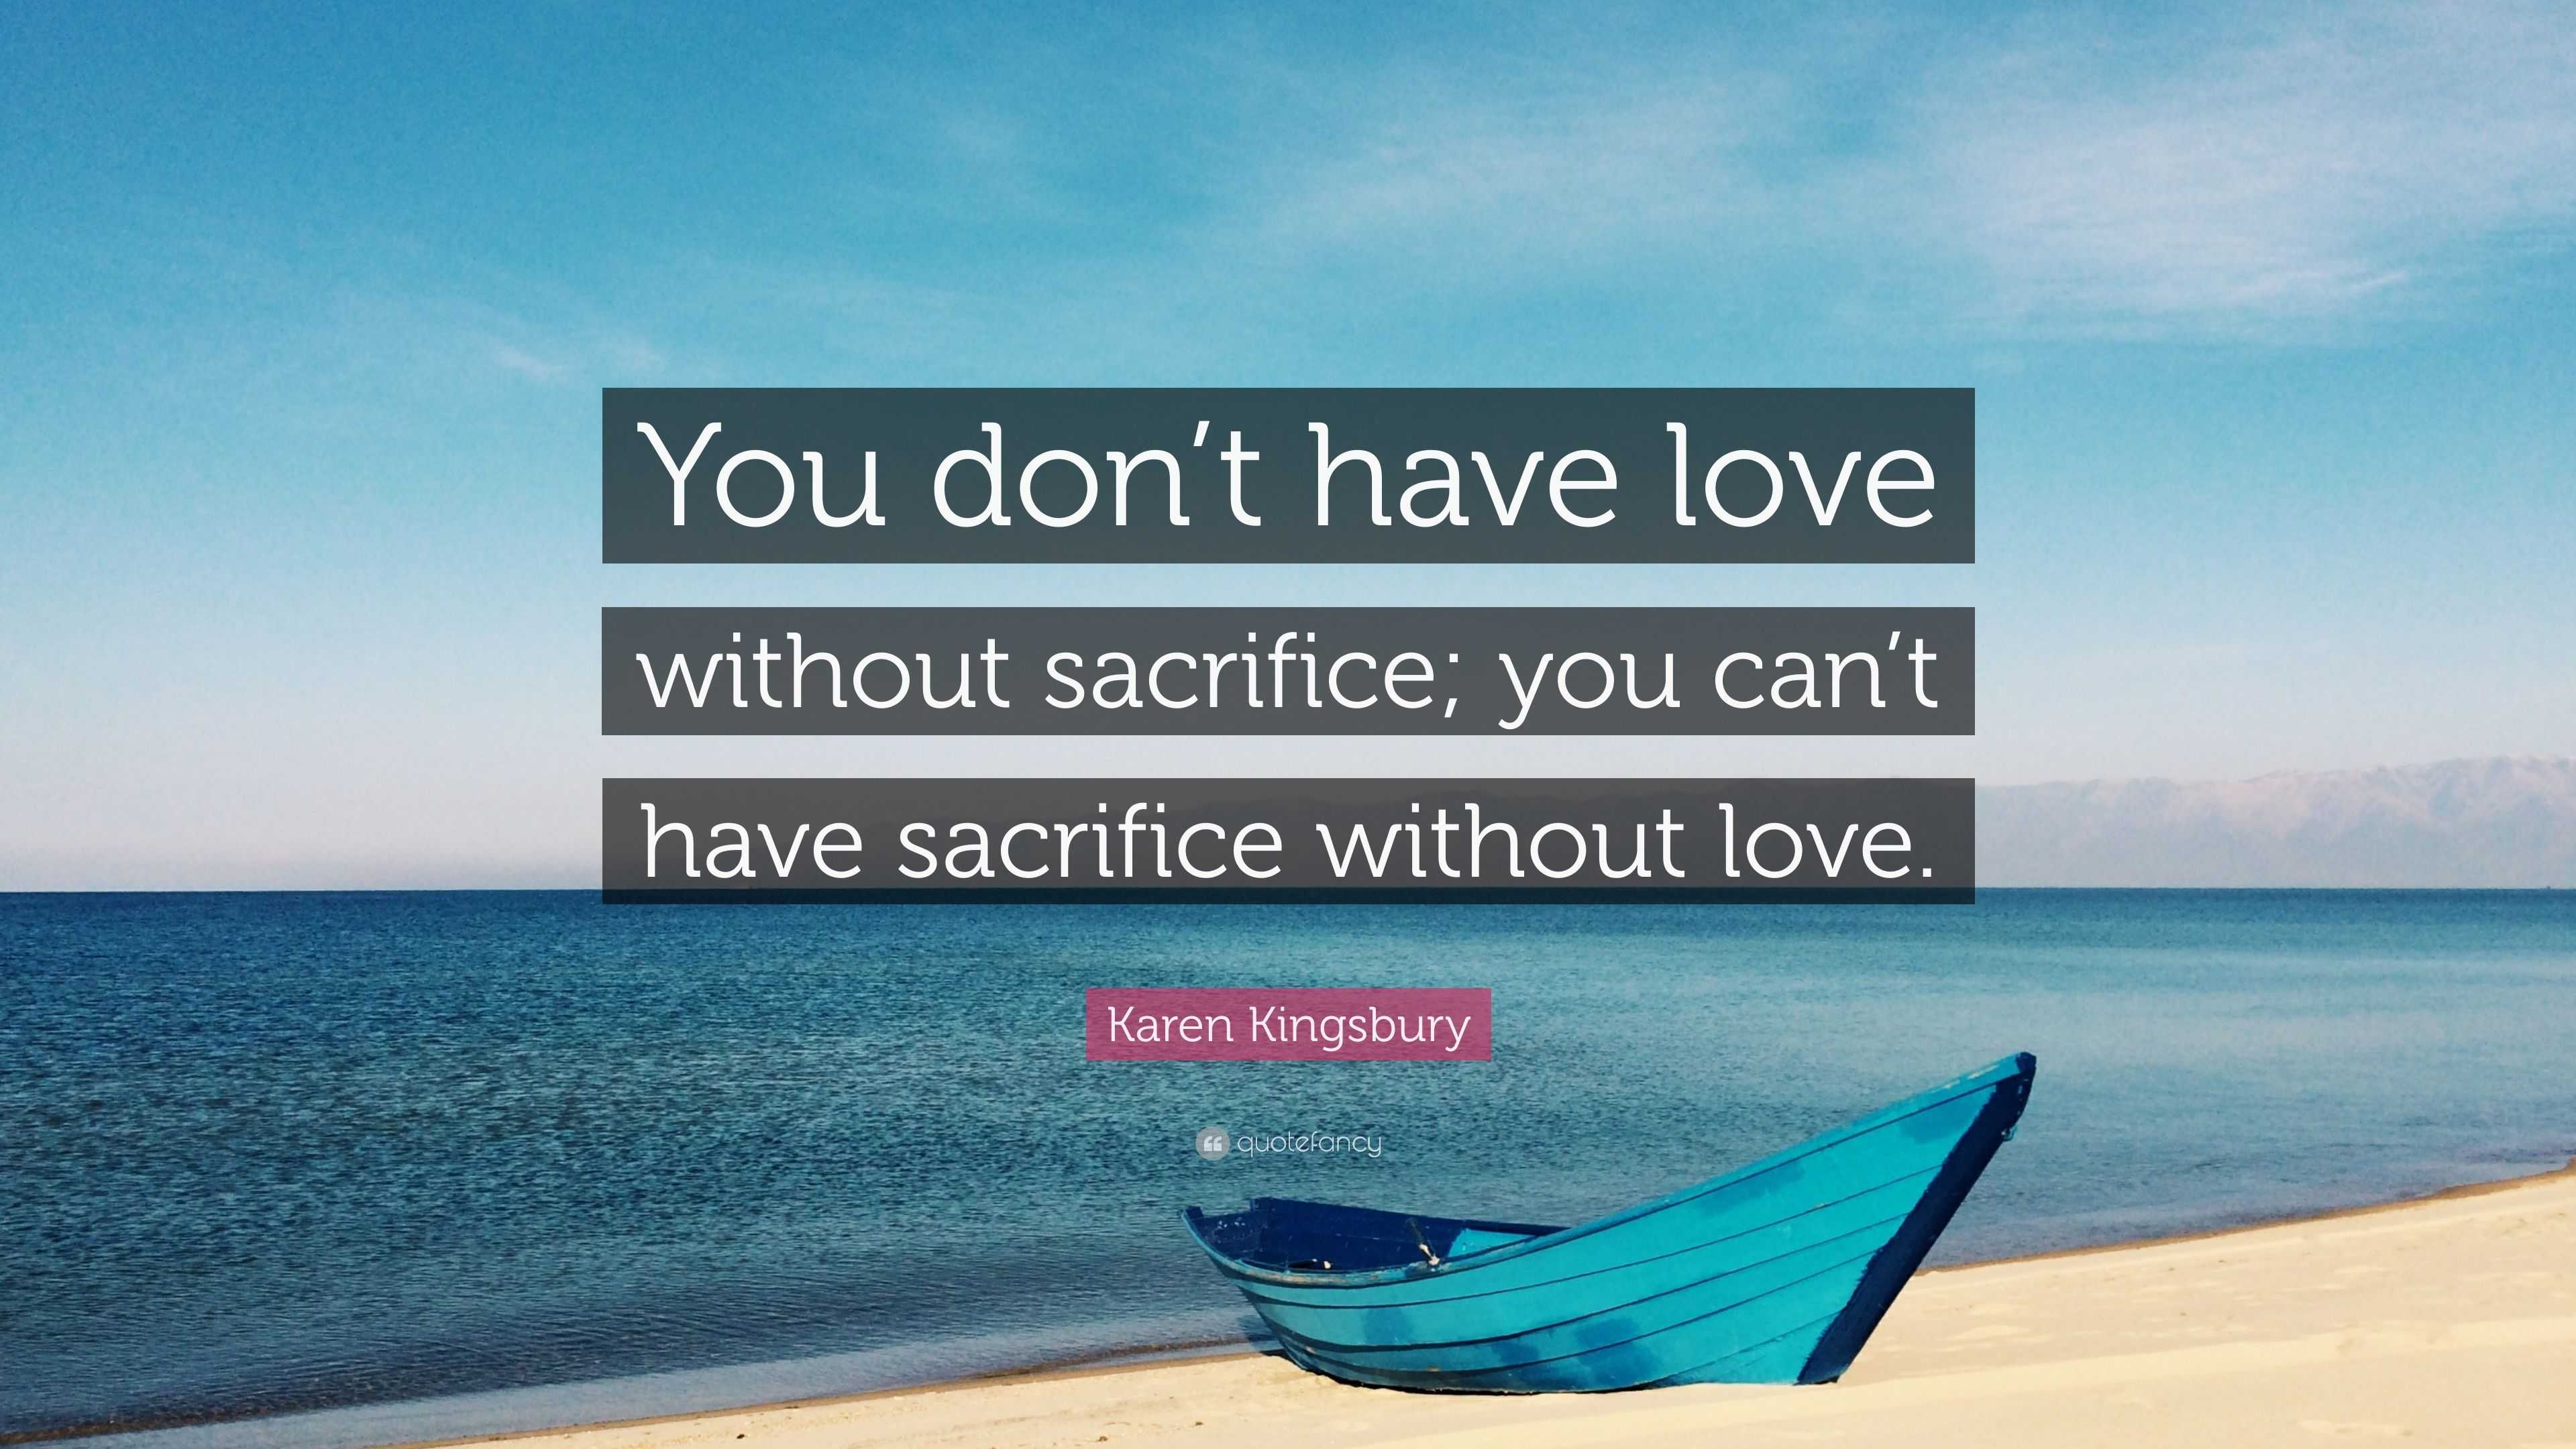 Karen Kingsbury Quote: “You don’t have love without sacrifice; you can ...